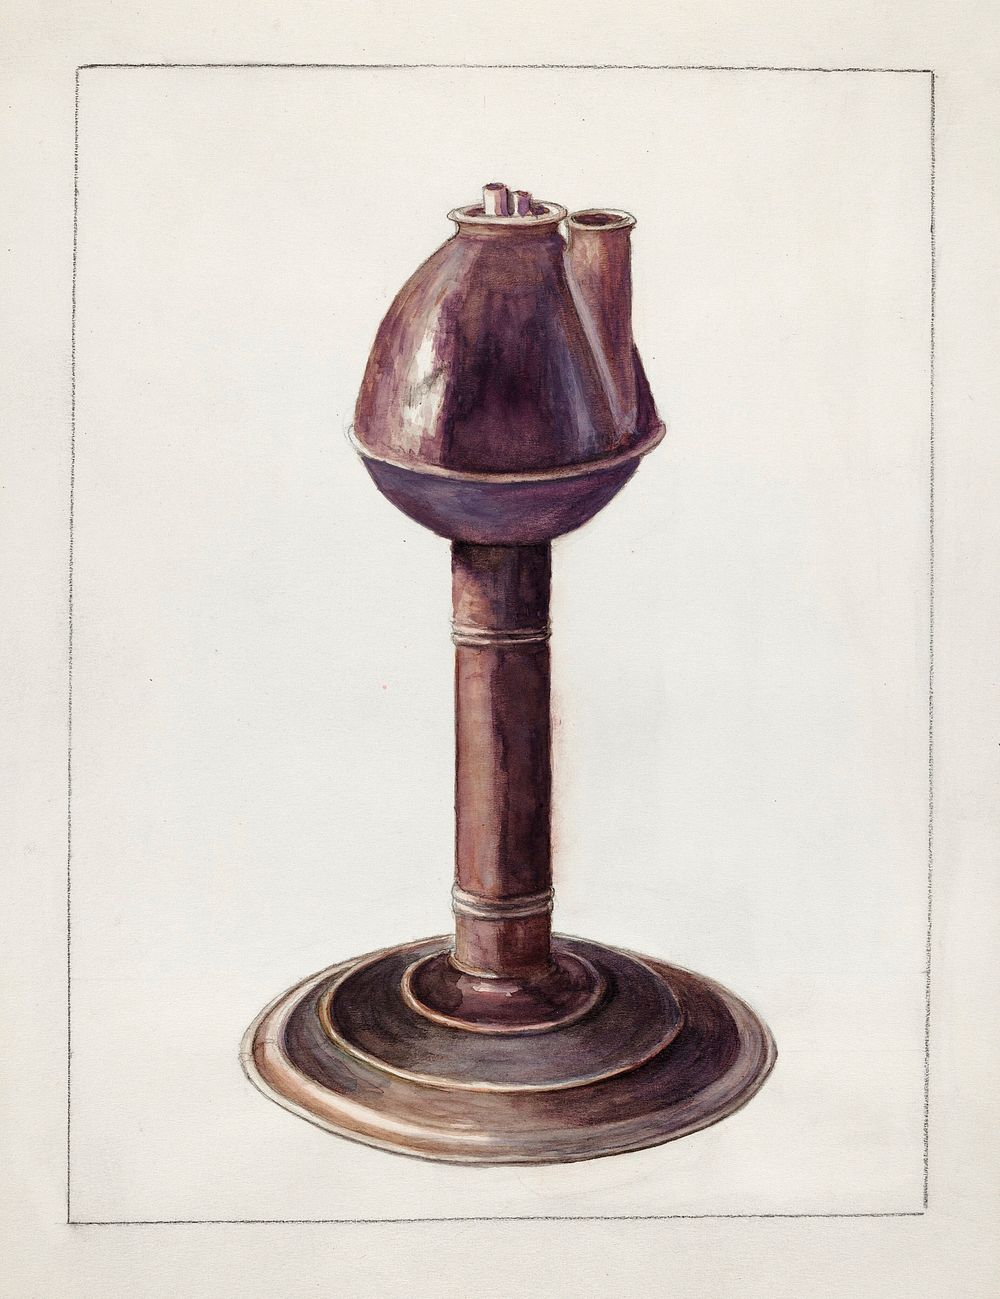 Lamp (ca.1936) by Hester Duany. Original from The National Gallery of Art. Digitally enhanced by rawpixel.